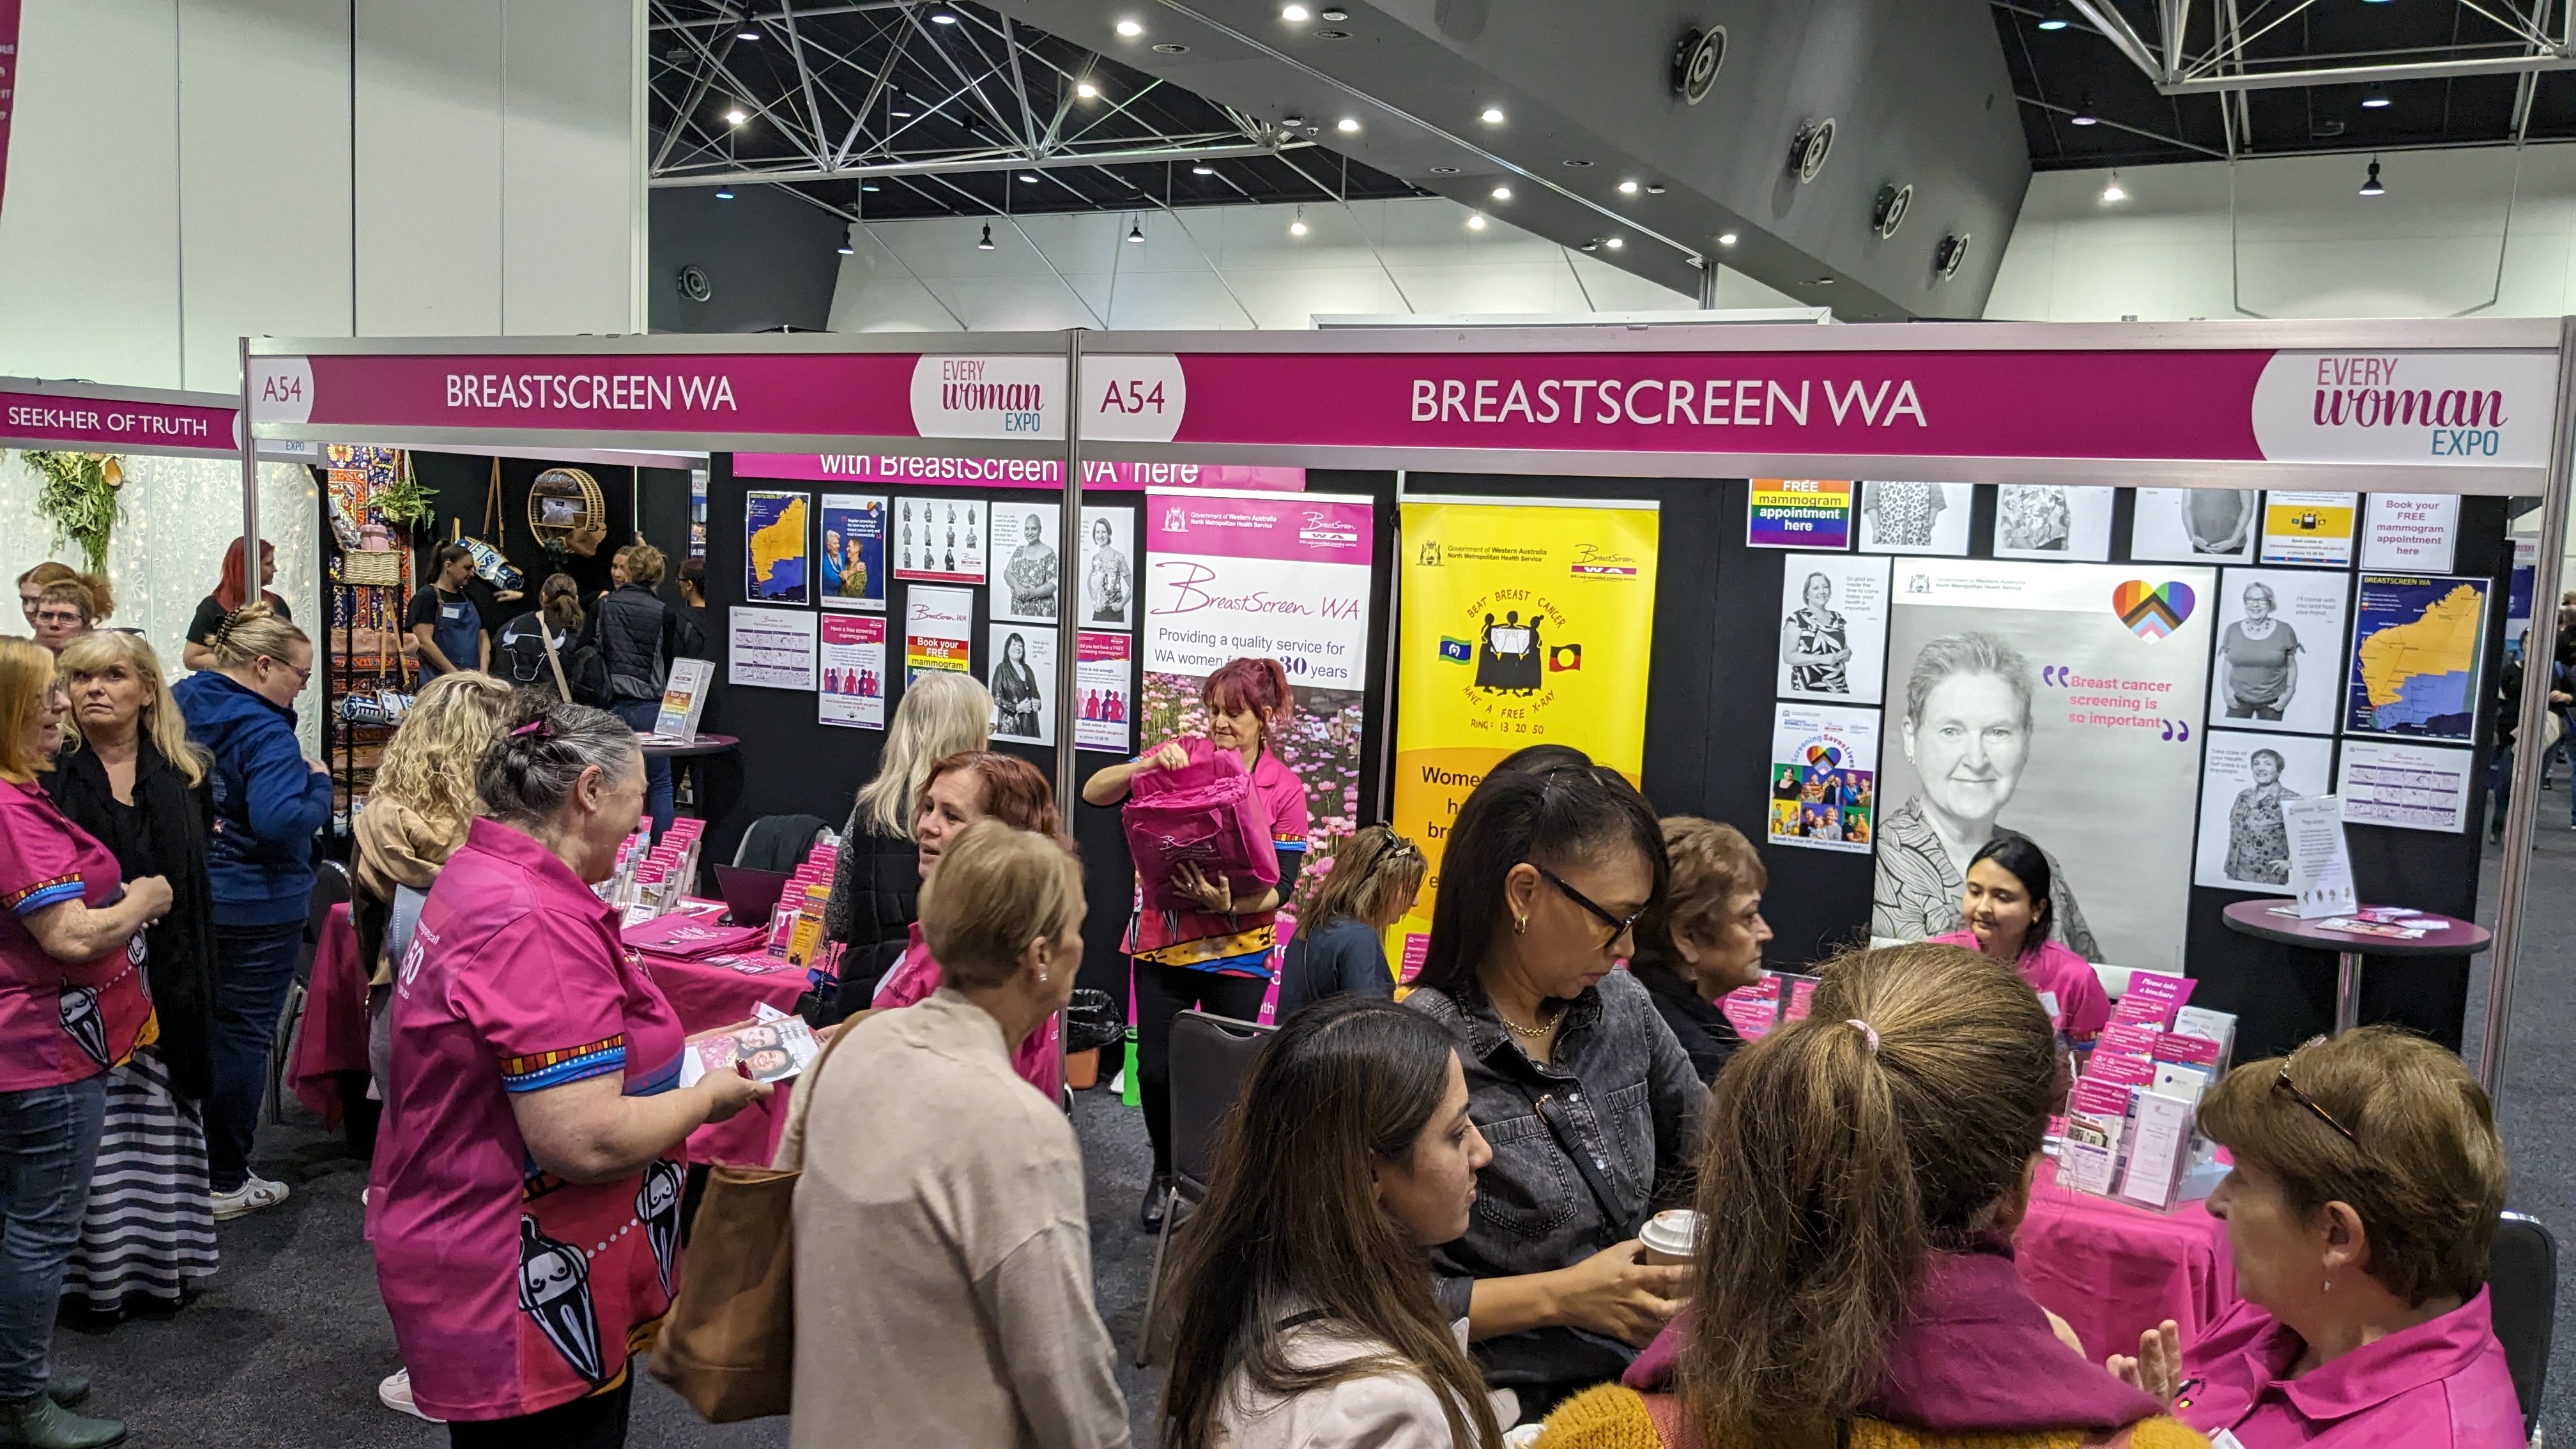 Staff and clients in front of BreastScreen WA display at EveryWoman Expo